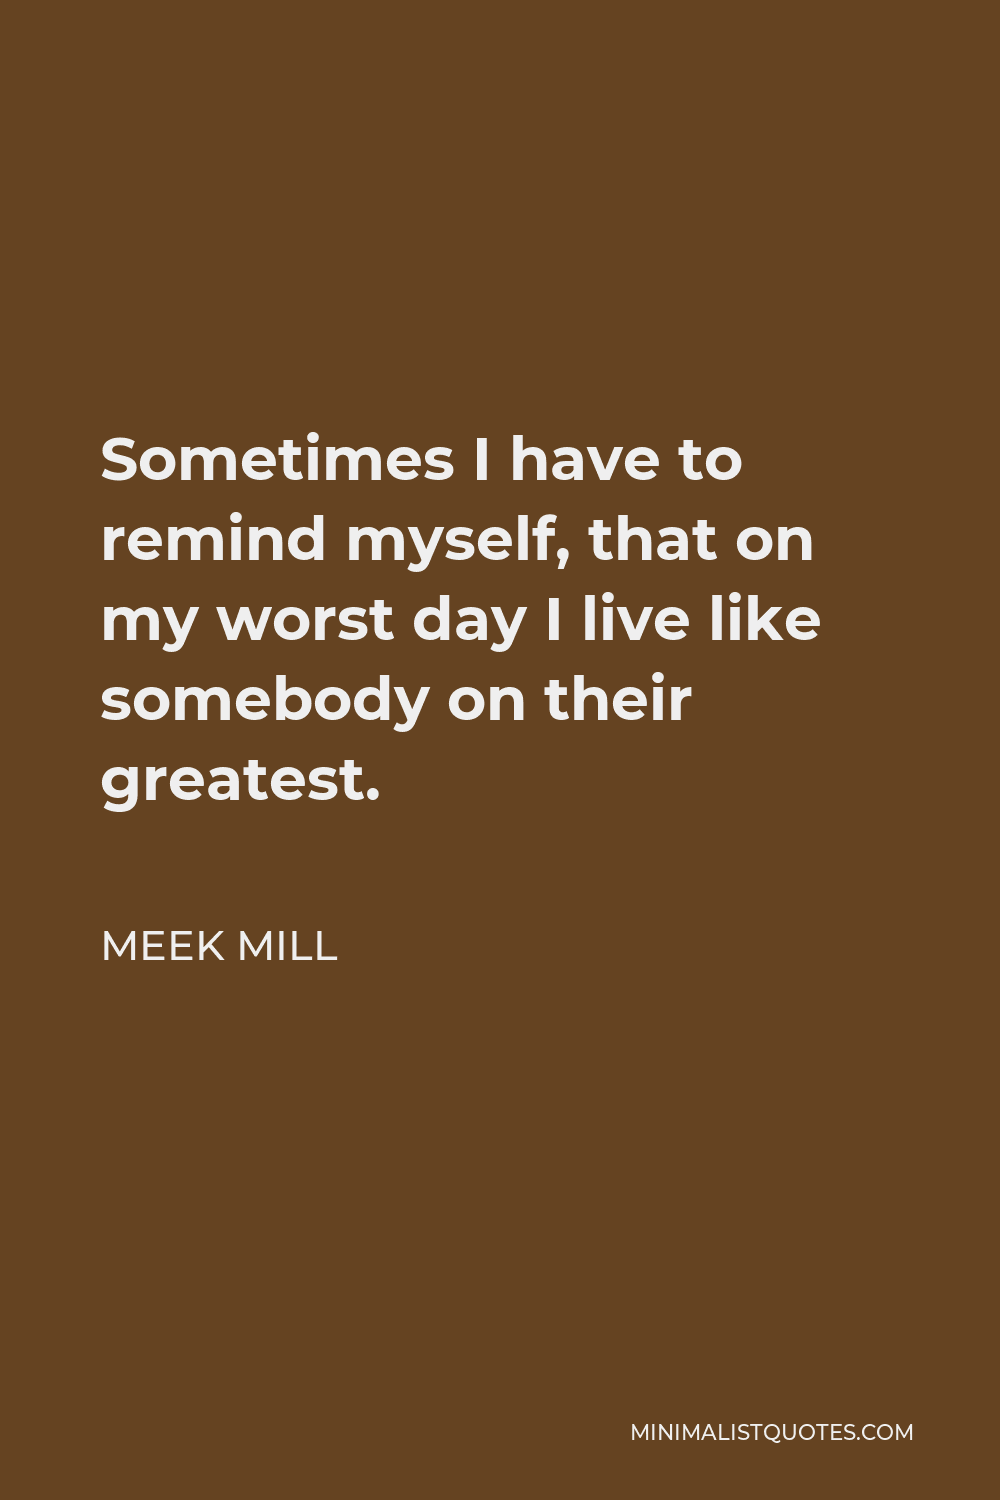 Meek Mill Quote - Sometimes I have to remind myself, that on my worst day I live like somebody on their greatest.